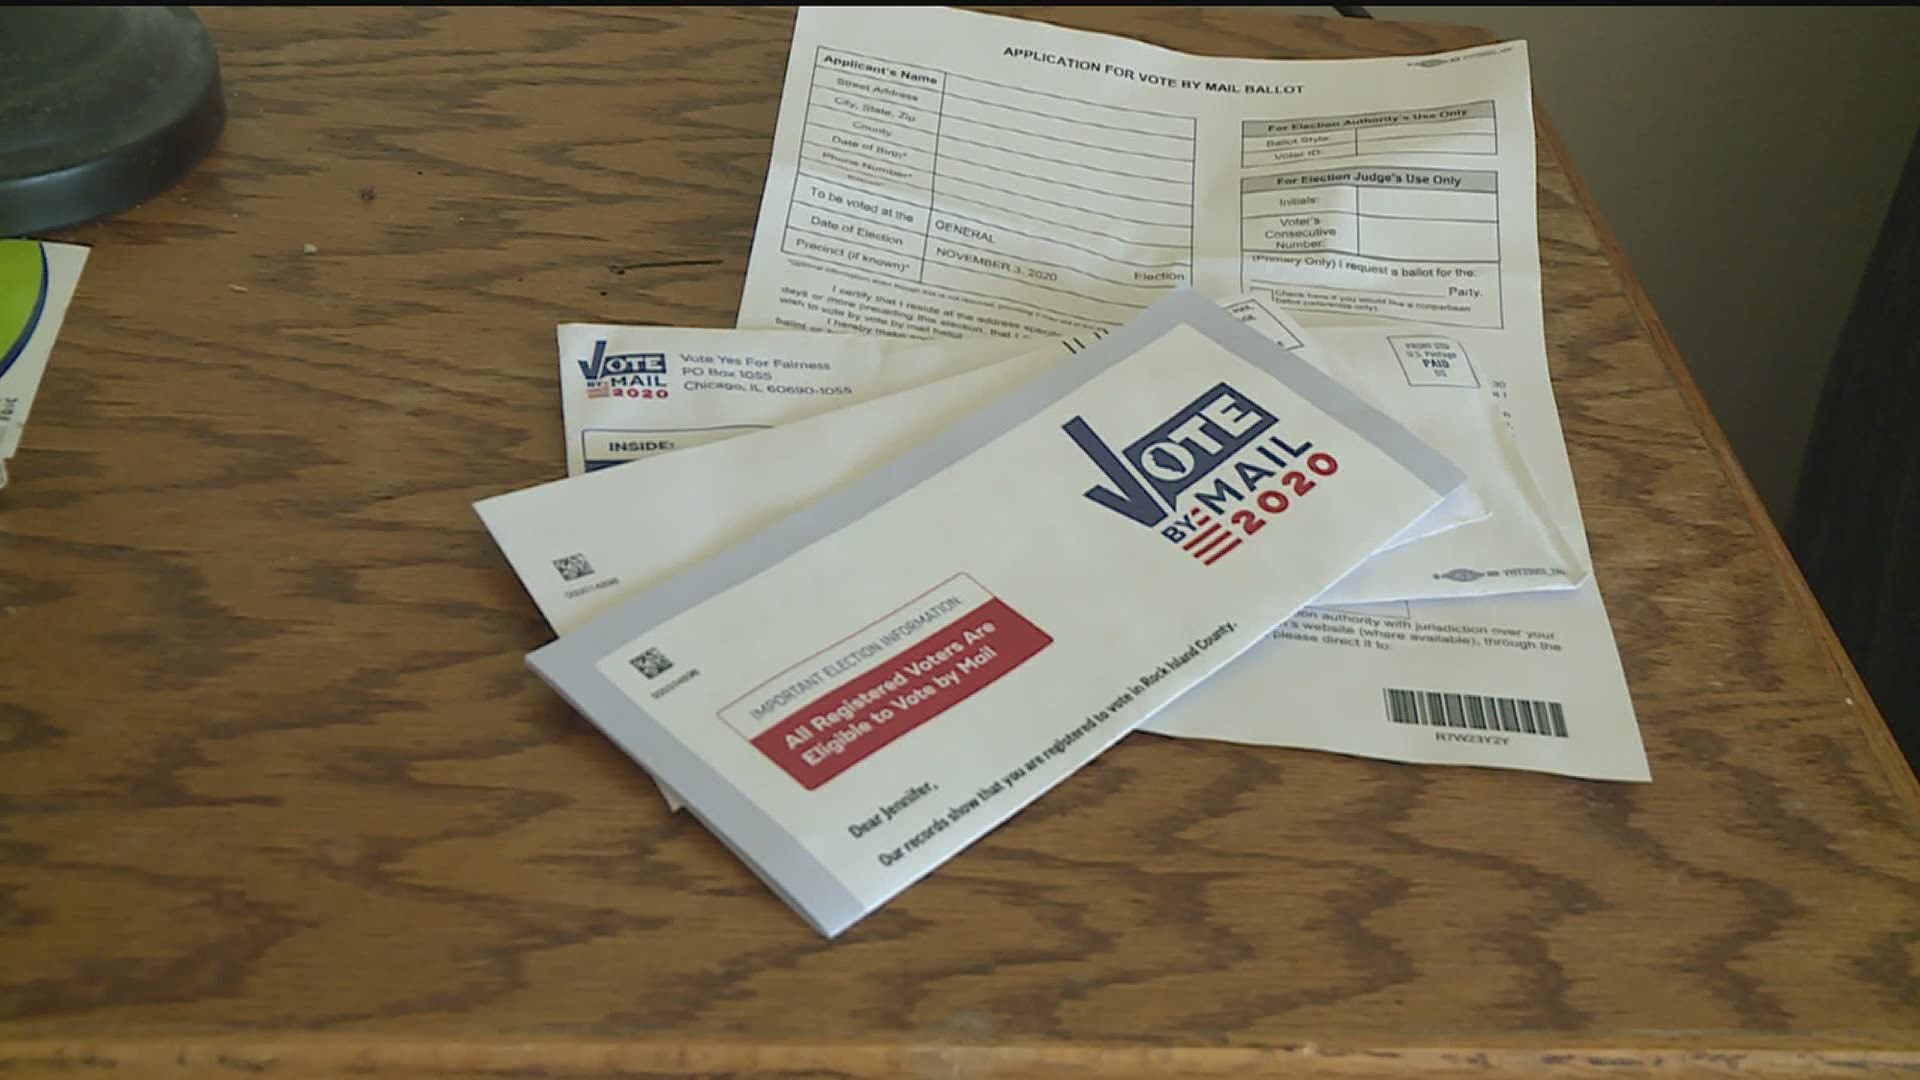 Vote by mail cards for the election will come from the county clerk